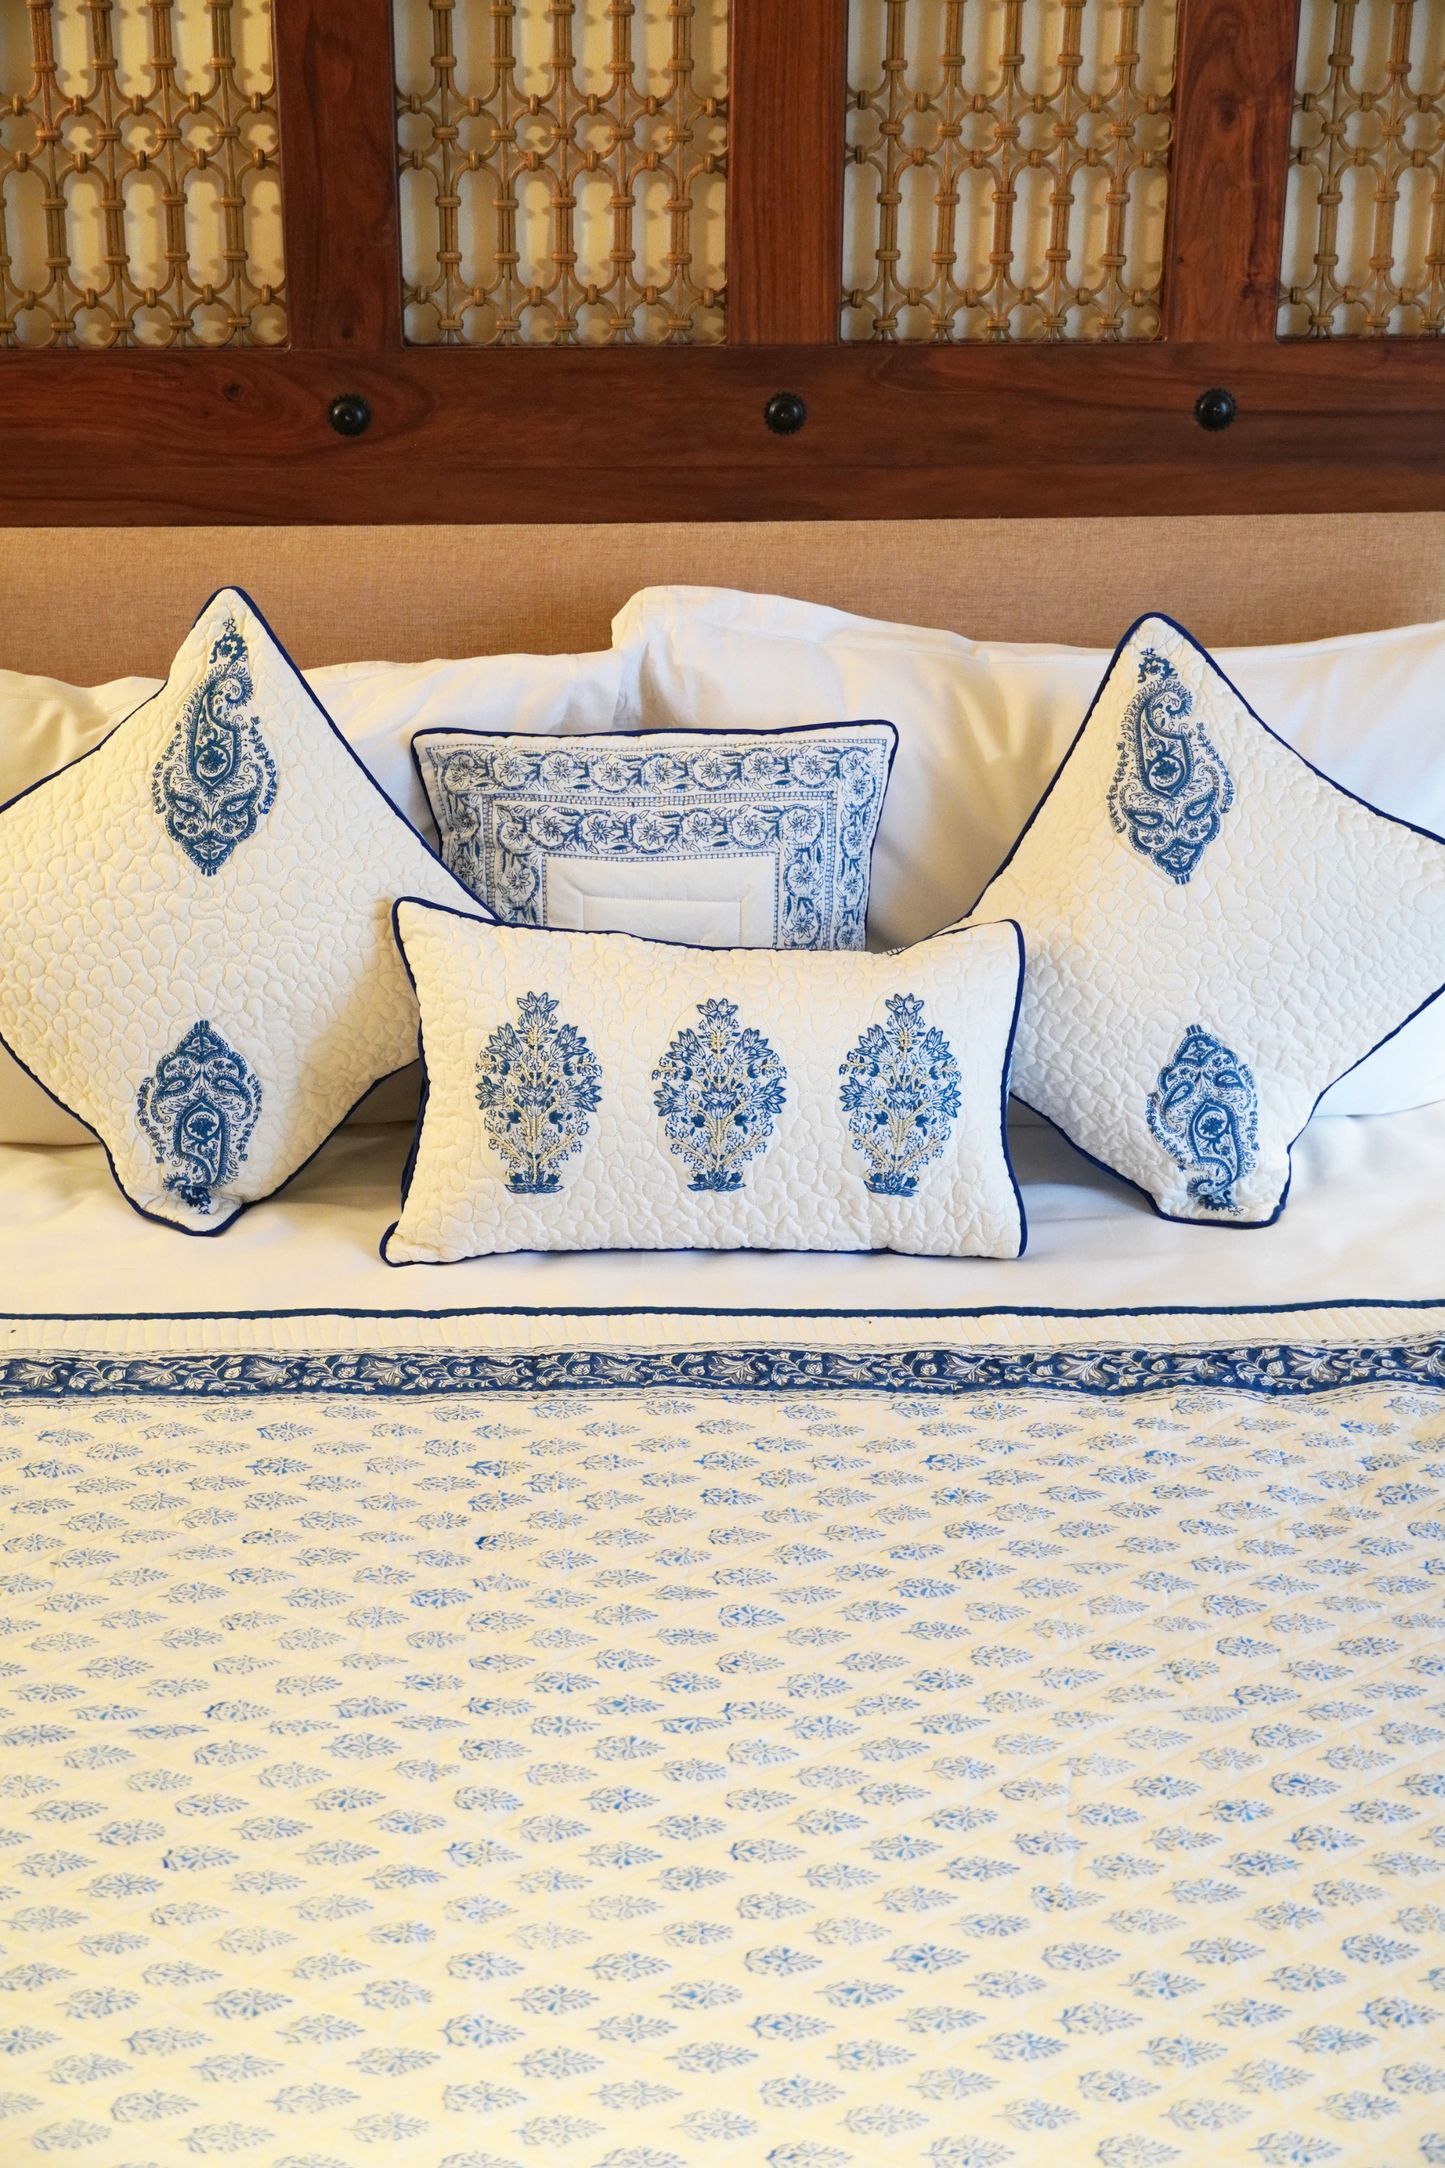 Indigo Paisley Motif Cushion Cover with Embroidery